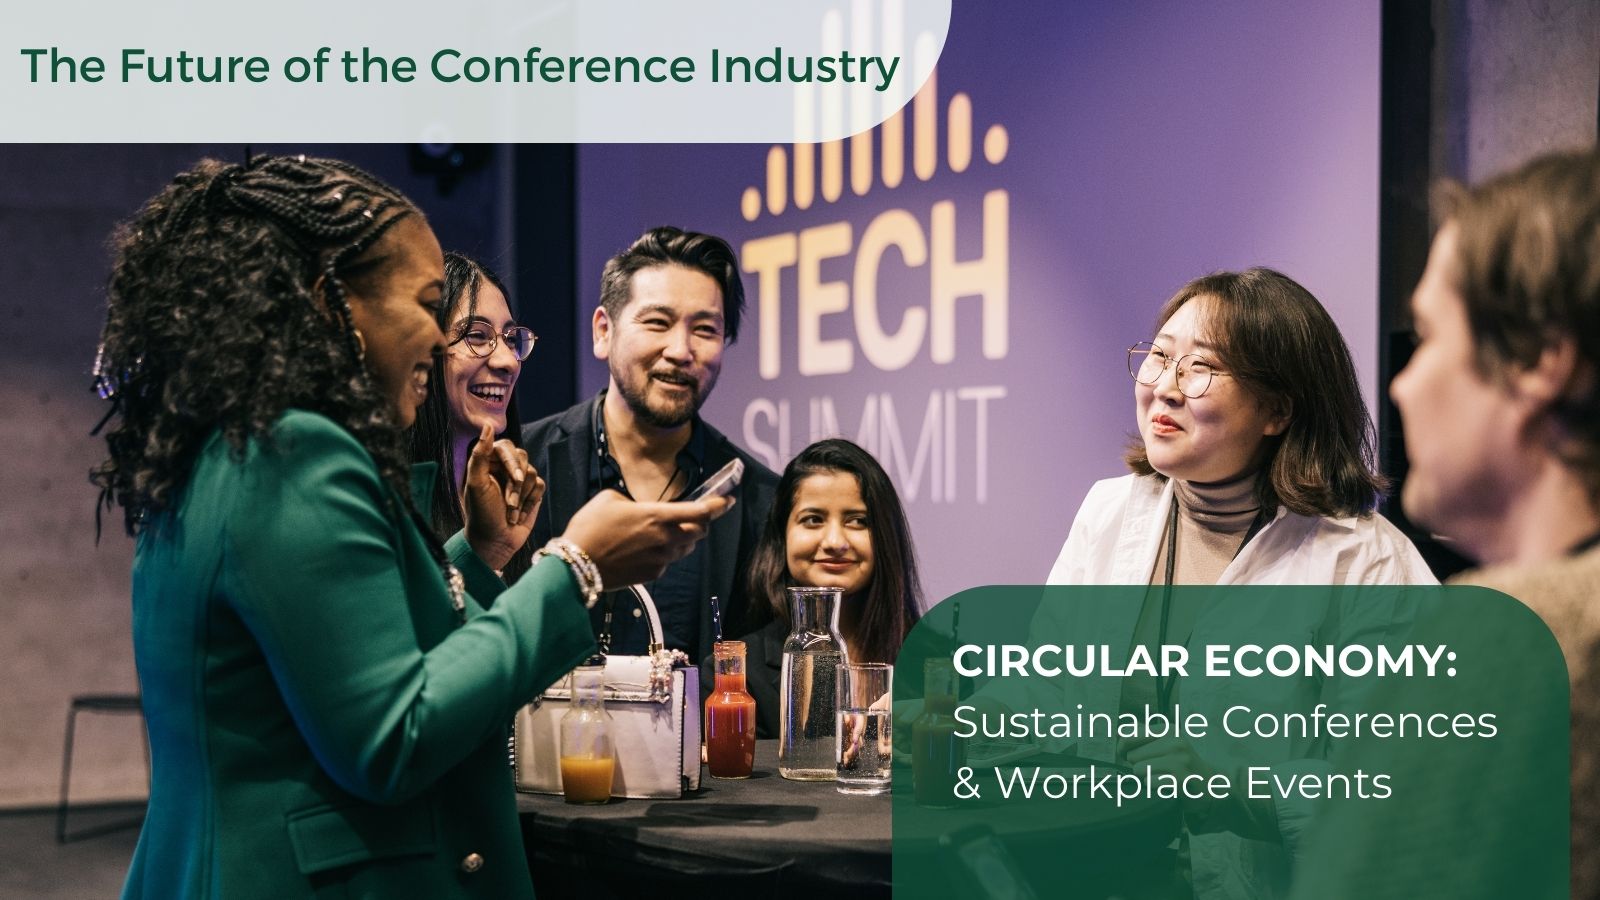 CIRCULAR ECONOMY: Sustainable Conferences & Workplace Events